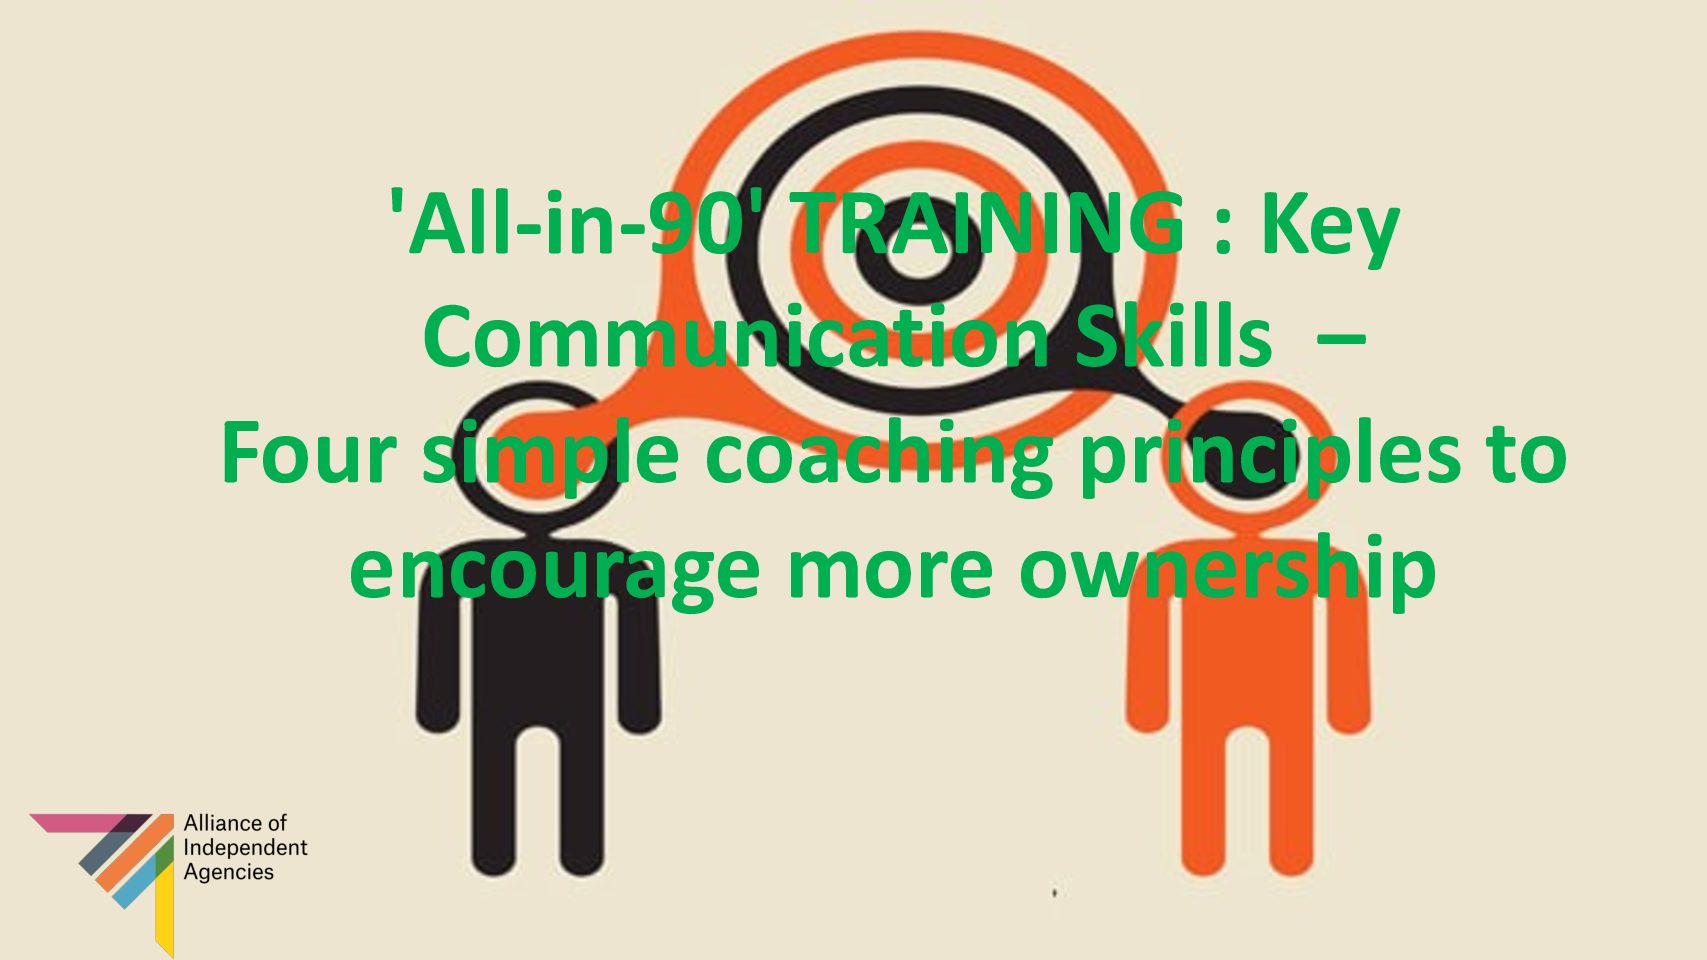 'All-in-90' TRAINING : Key Communications Skills - Four Simple Coaching Principles to Encourage More Ownership